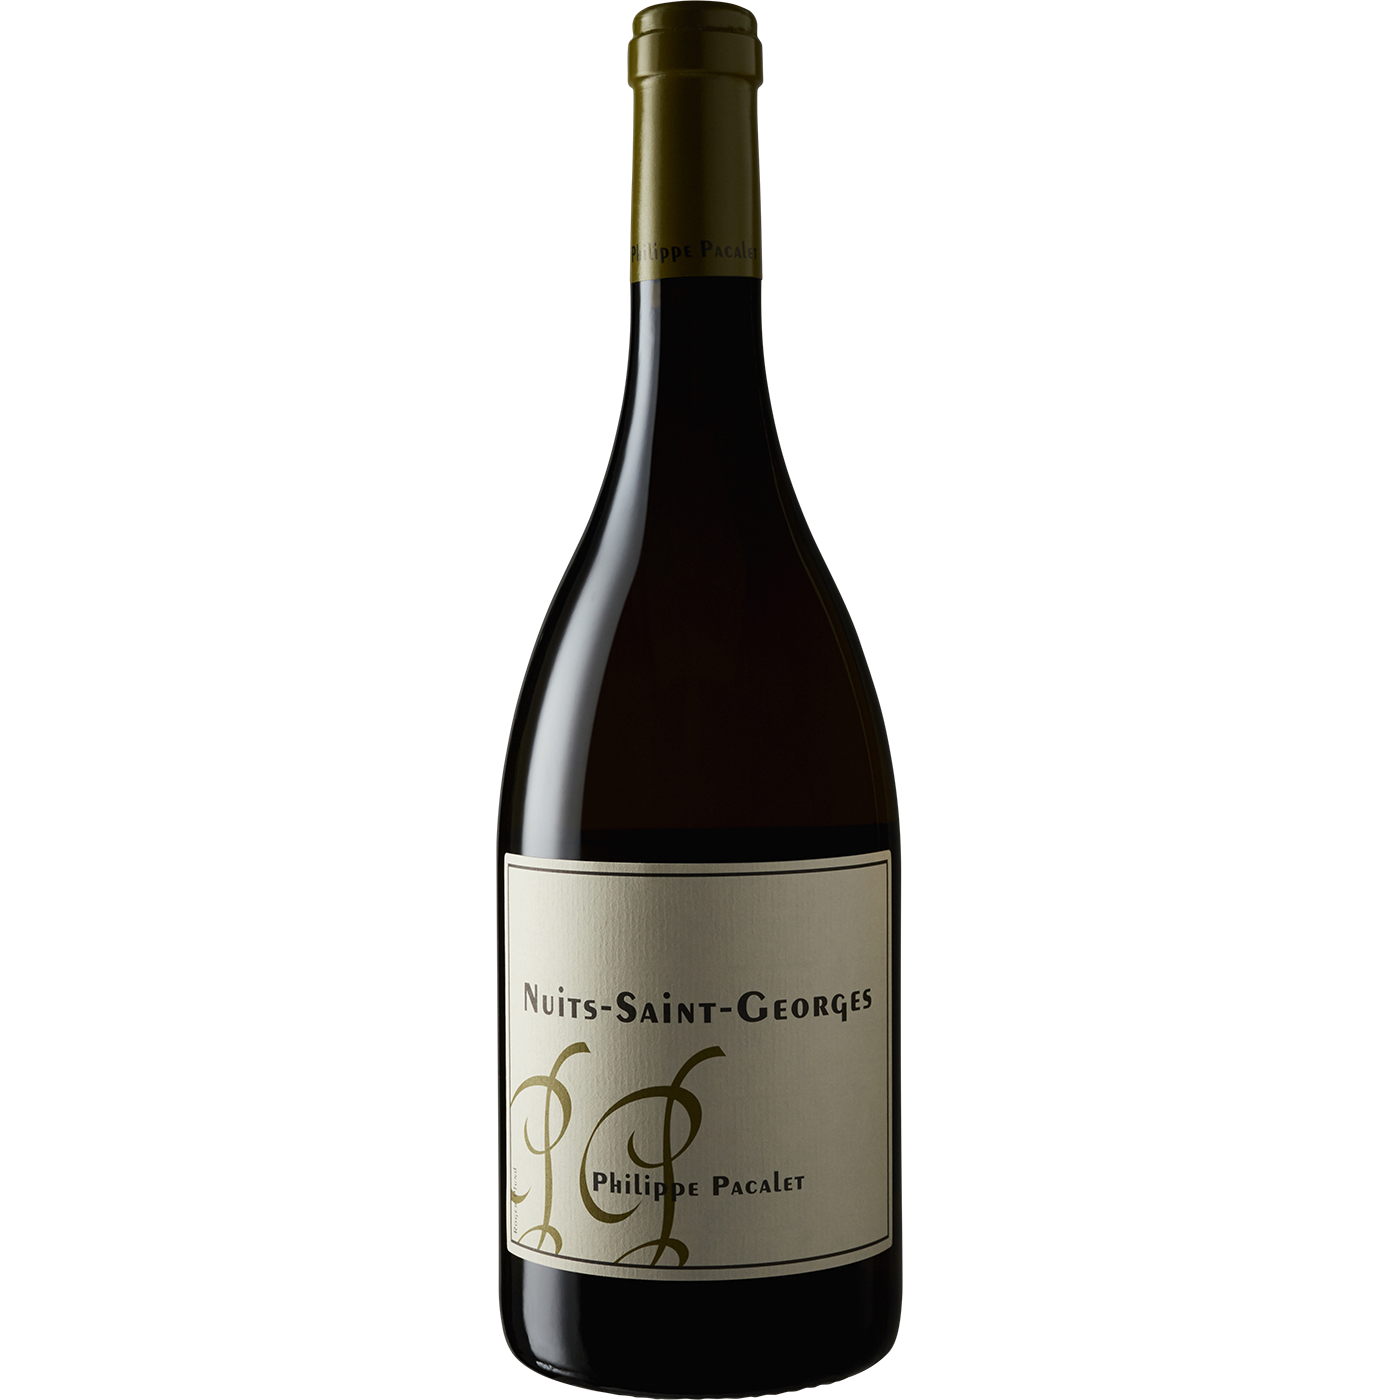 Philippe Pacalet Nuits-St-Georges Blanc 2015